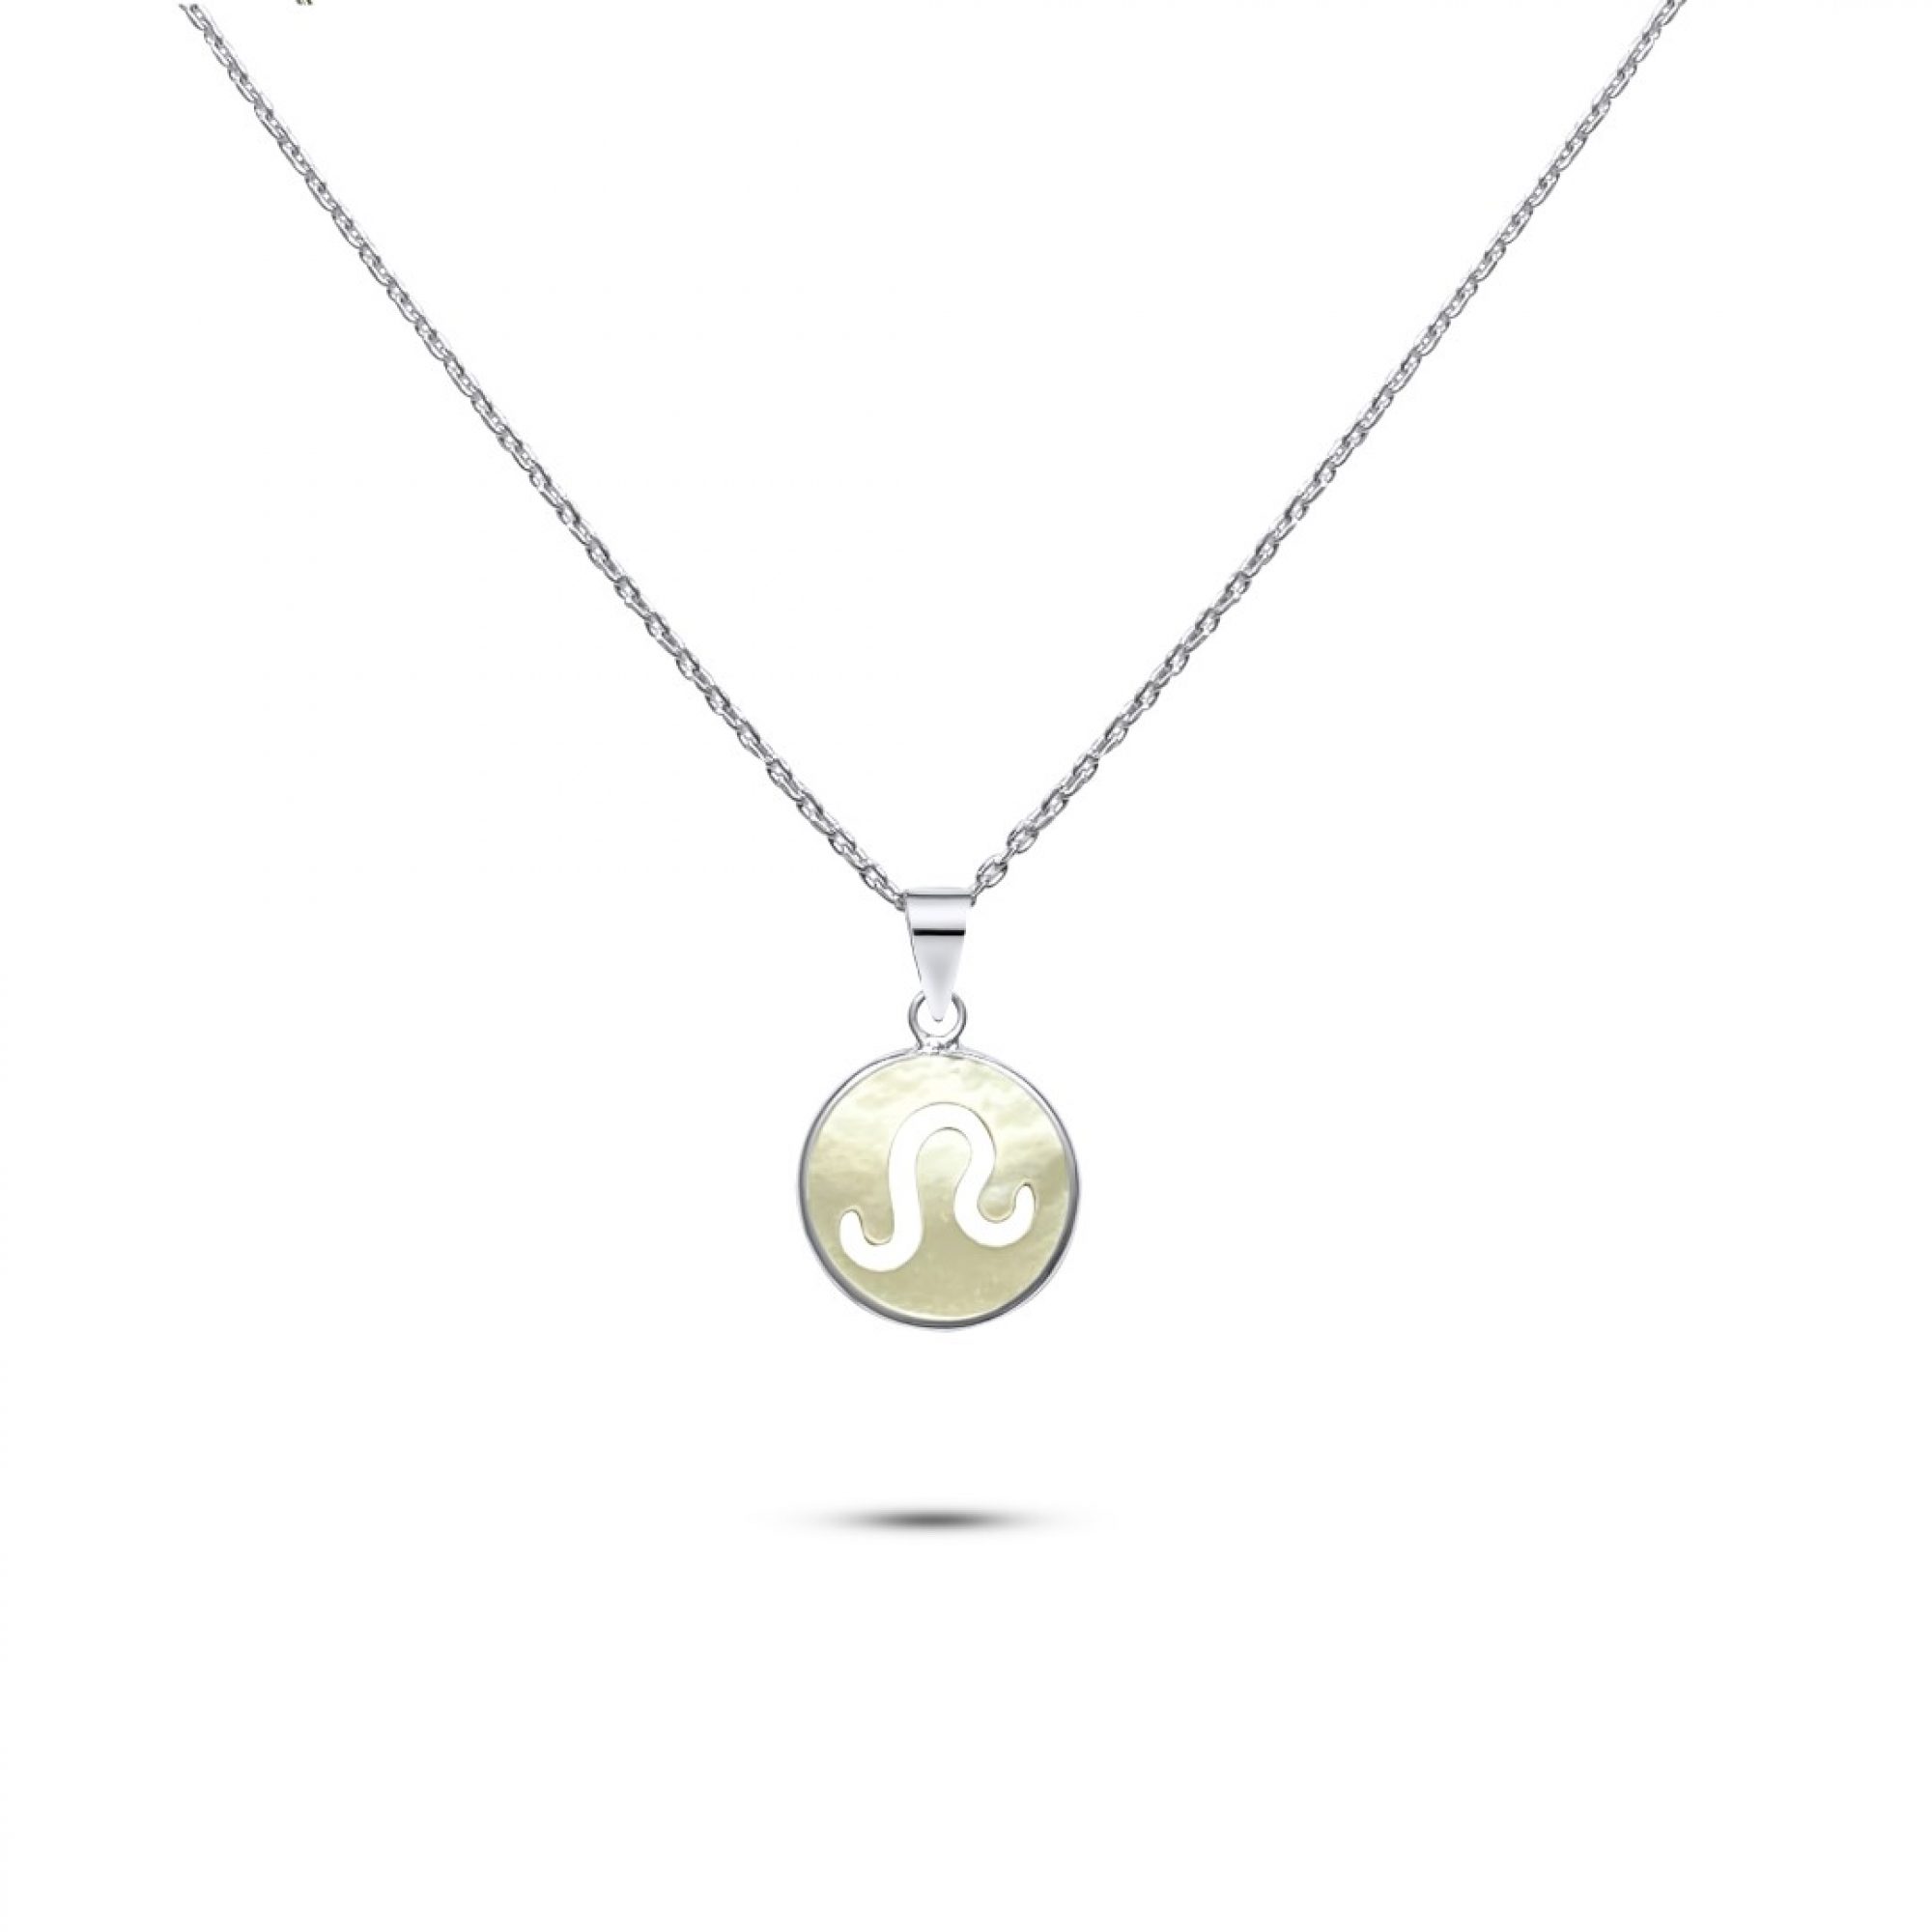 Leo sign necklace with mother of pearl